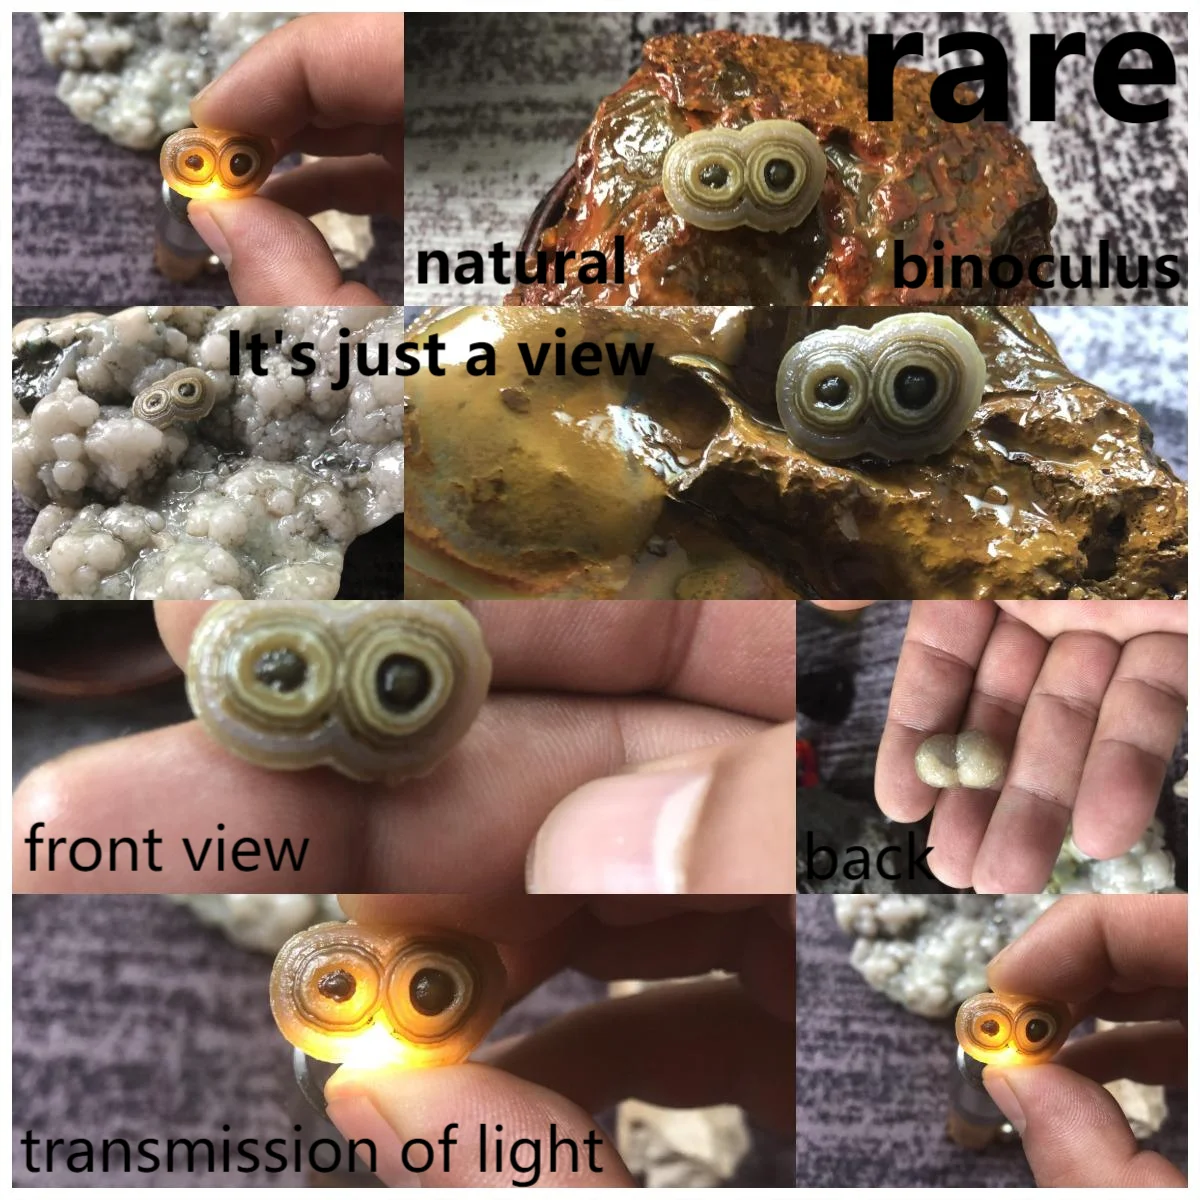 1Pcs Nature Stone Making Jewelry Of God Has Charms Gem Of Inner Mongolia Gobi Alxa Eye Stone Boutique All Selected God's Work 1pcs nature stone making jewelry of god has charms gem of inner mongolia gobi alxa eye stone boutique all selected god s work